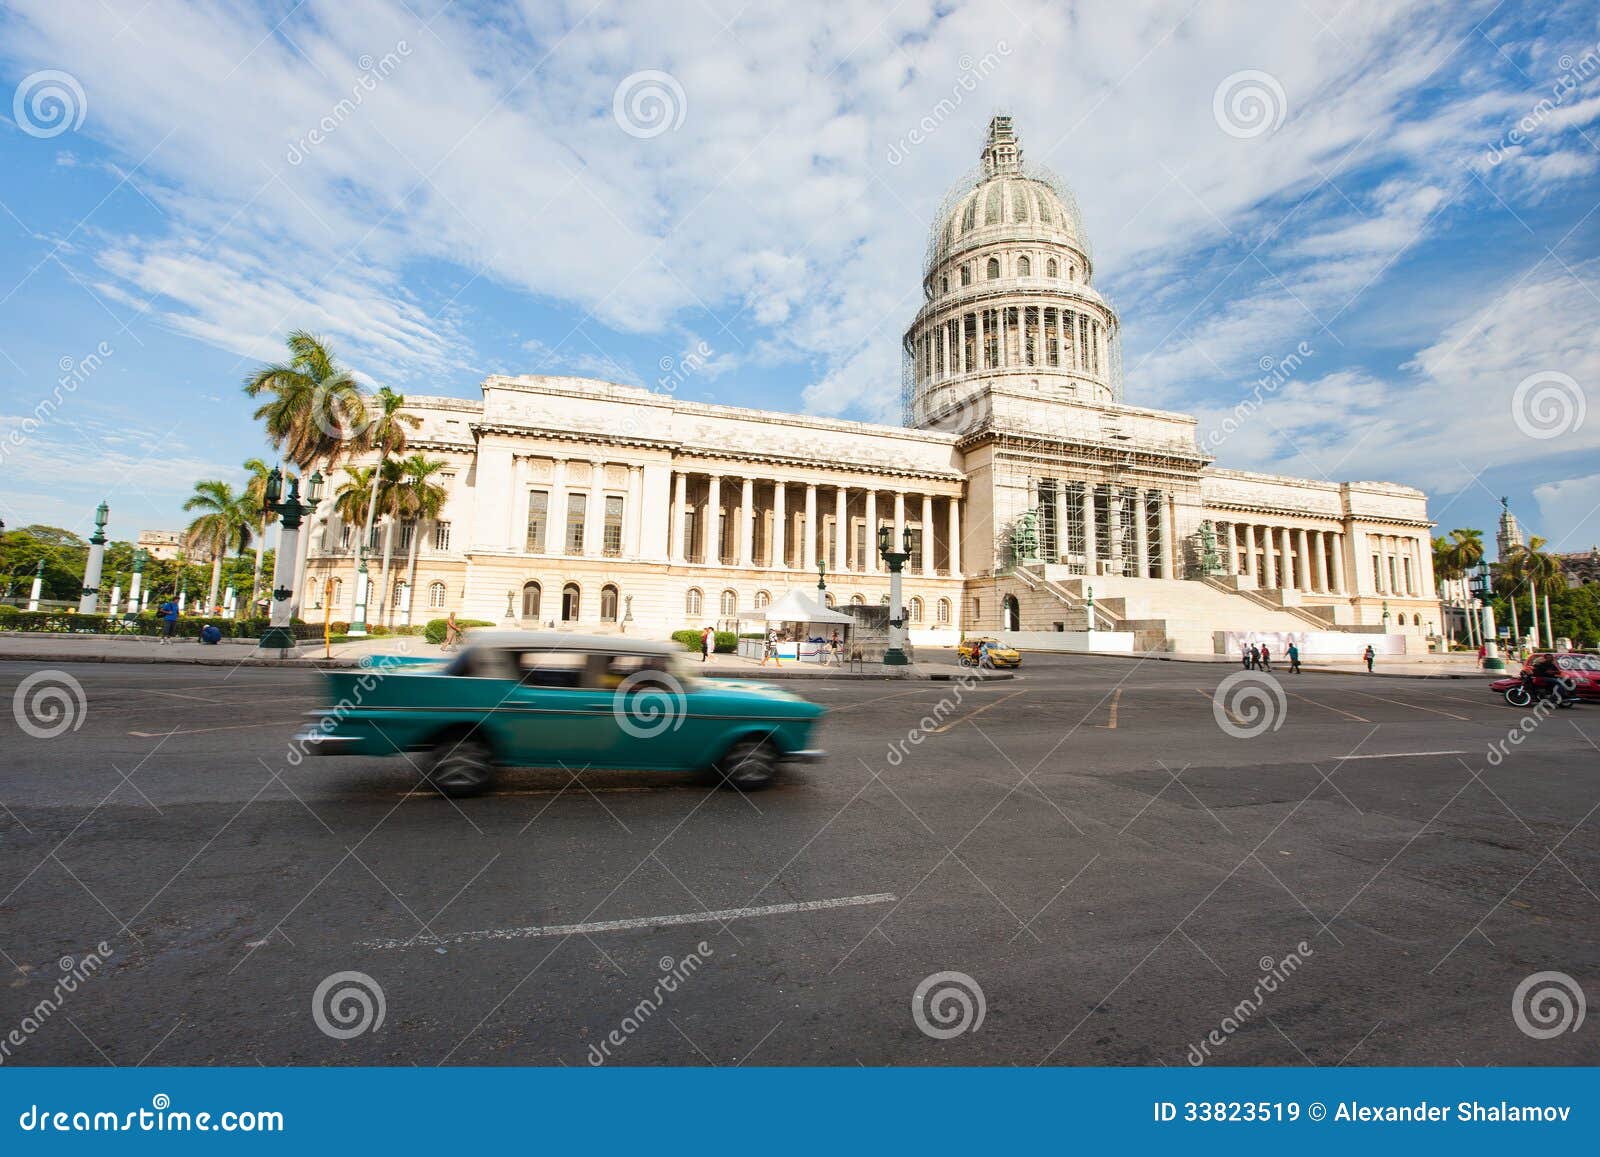 View of The Capitol in old Havana, Cuba